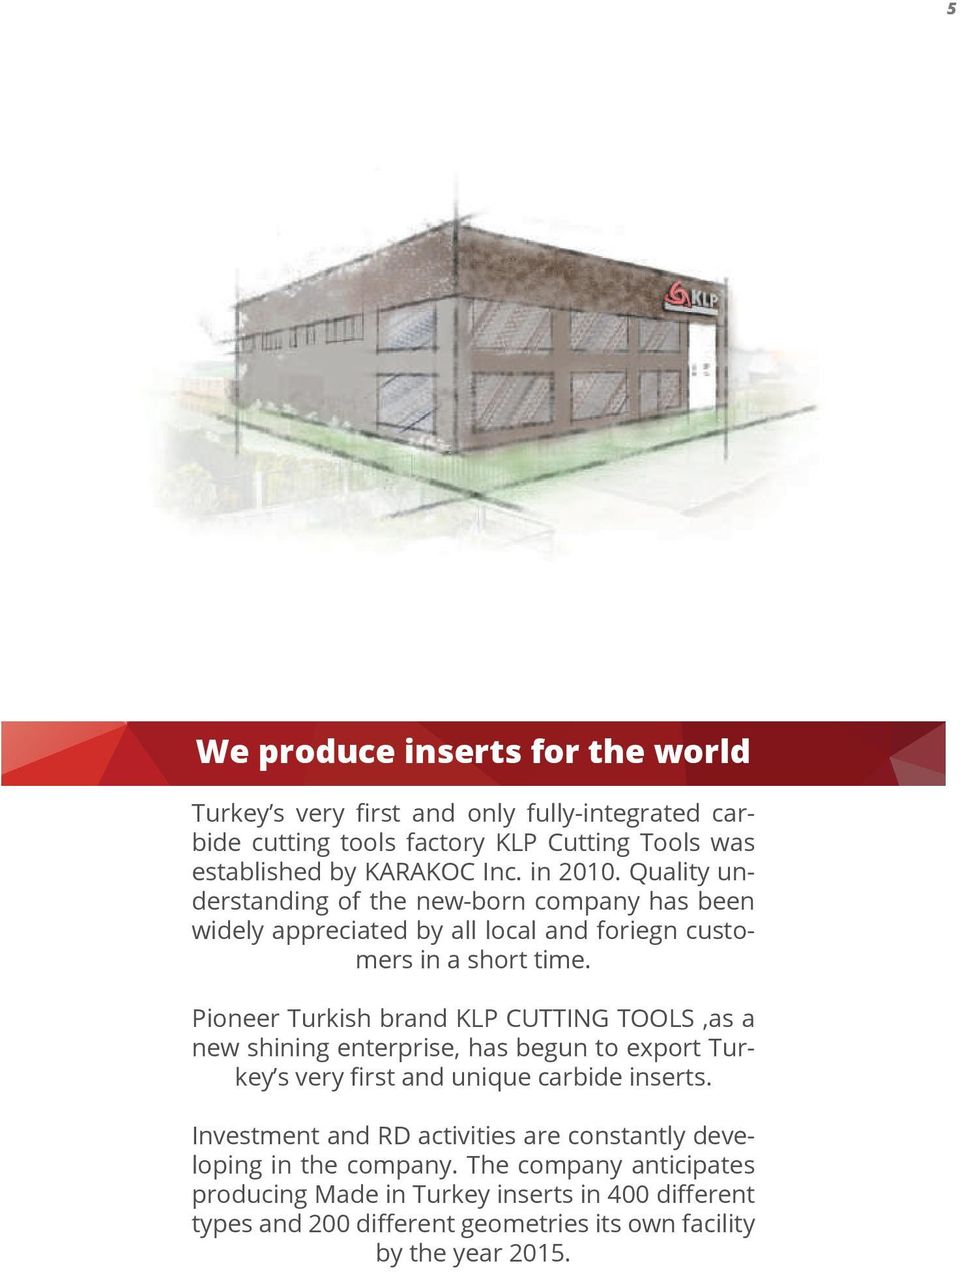 Pioneer Turkish brand KLP CUTTING TOOLS,as a new shining enterprise, has begun to export Turkey s very first and unique carbide inserts.